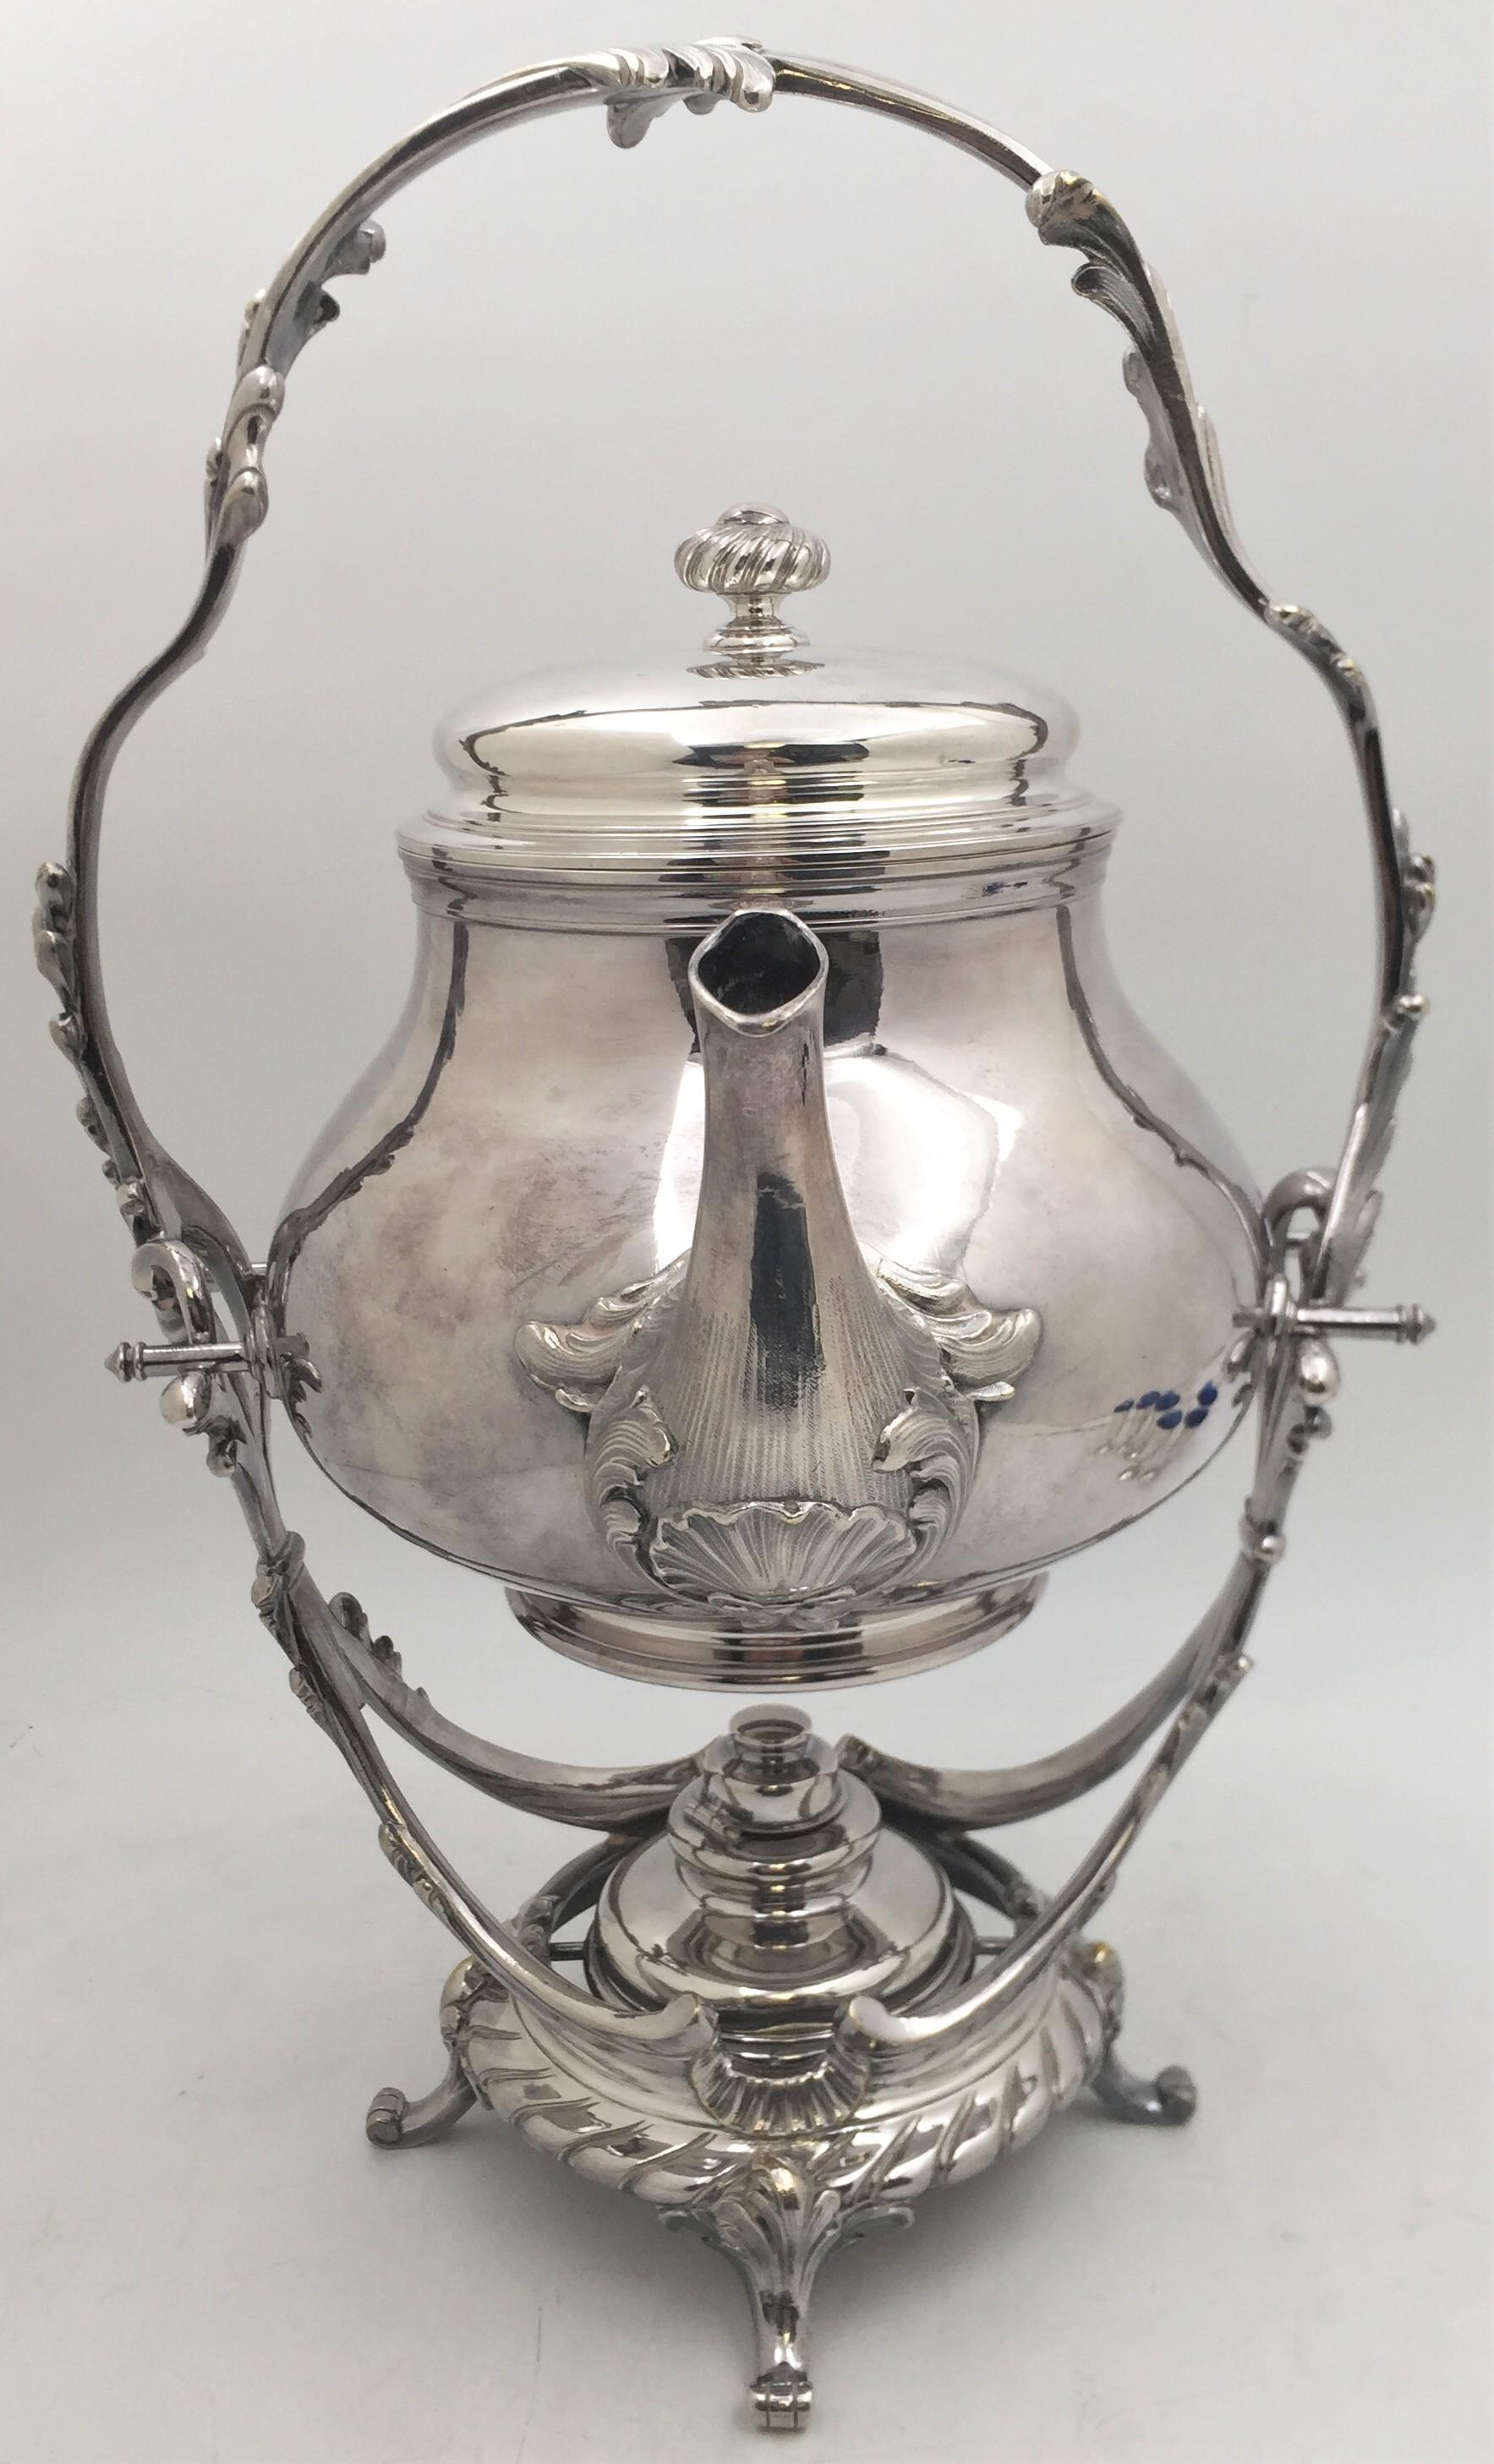 Christofle silver plated kettle on stand in ornate Rococo style with swirling natural motifs. The stand, which has 4 legged feet, measures an impressive 16 1/2'' in height by 7 1/4'' in depth. The kettle measures 8 1/2'' in height by 7 1/2'' in